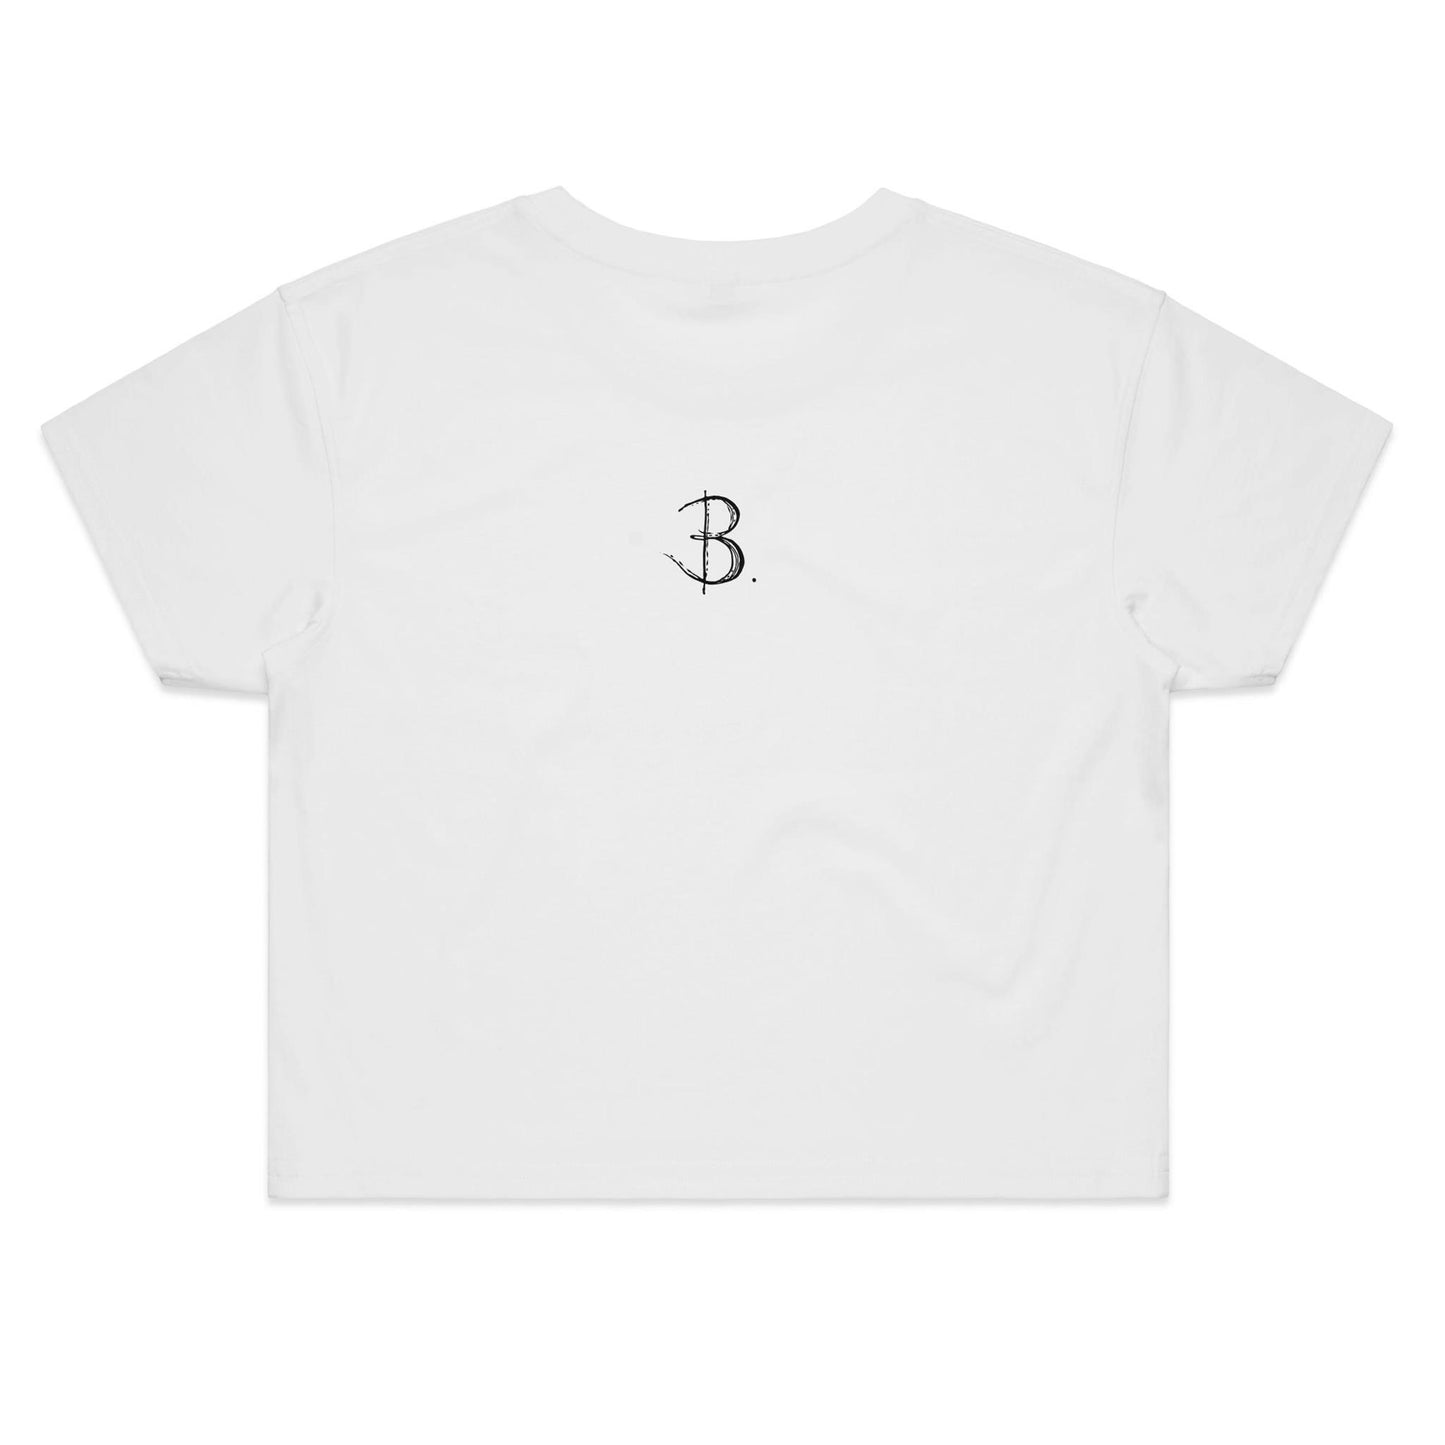 Smile Crop Top Tee, contemporary streetwear, back with 'B' logo. Designed by Bridget Bradley, Abstract Artist and Designer